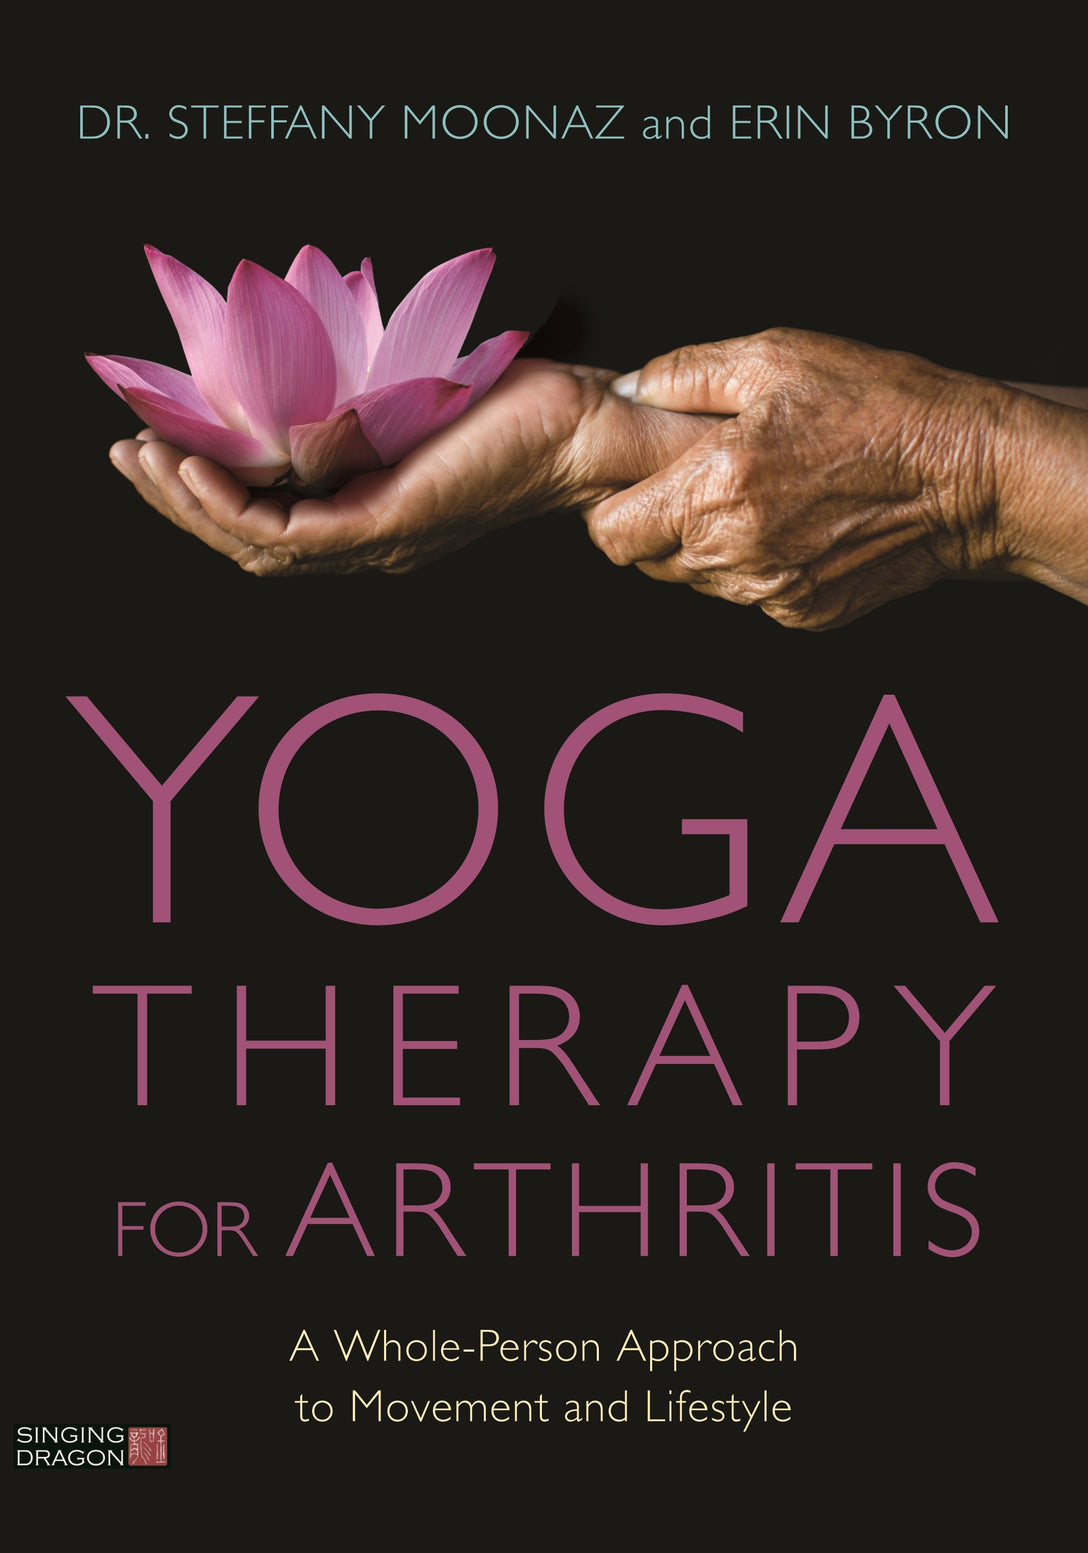 Yoga Therapy for Arthritis by Dr Steffany Moonaz, Erin Byron, Dr. Clifton O Bingham III, MD